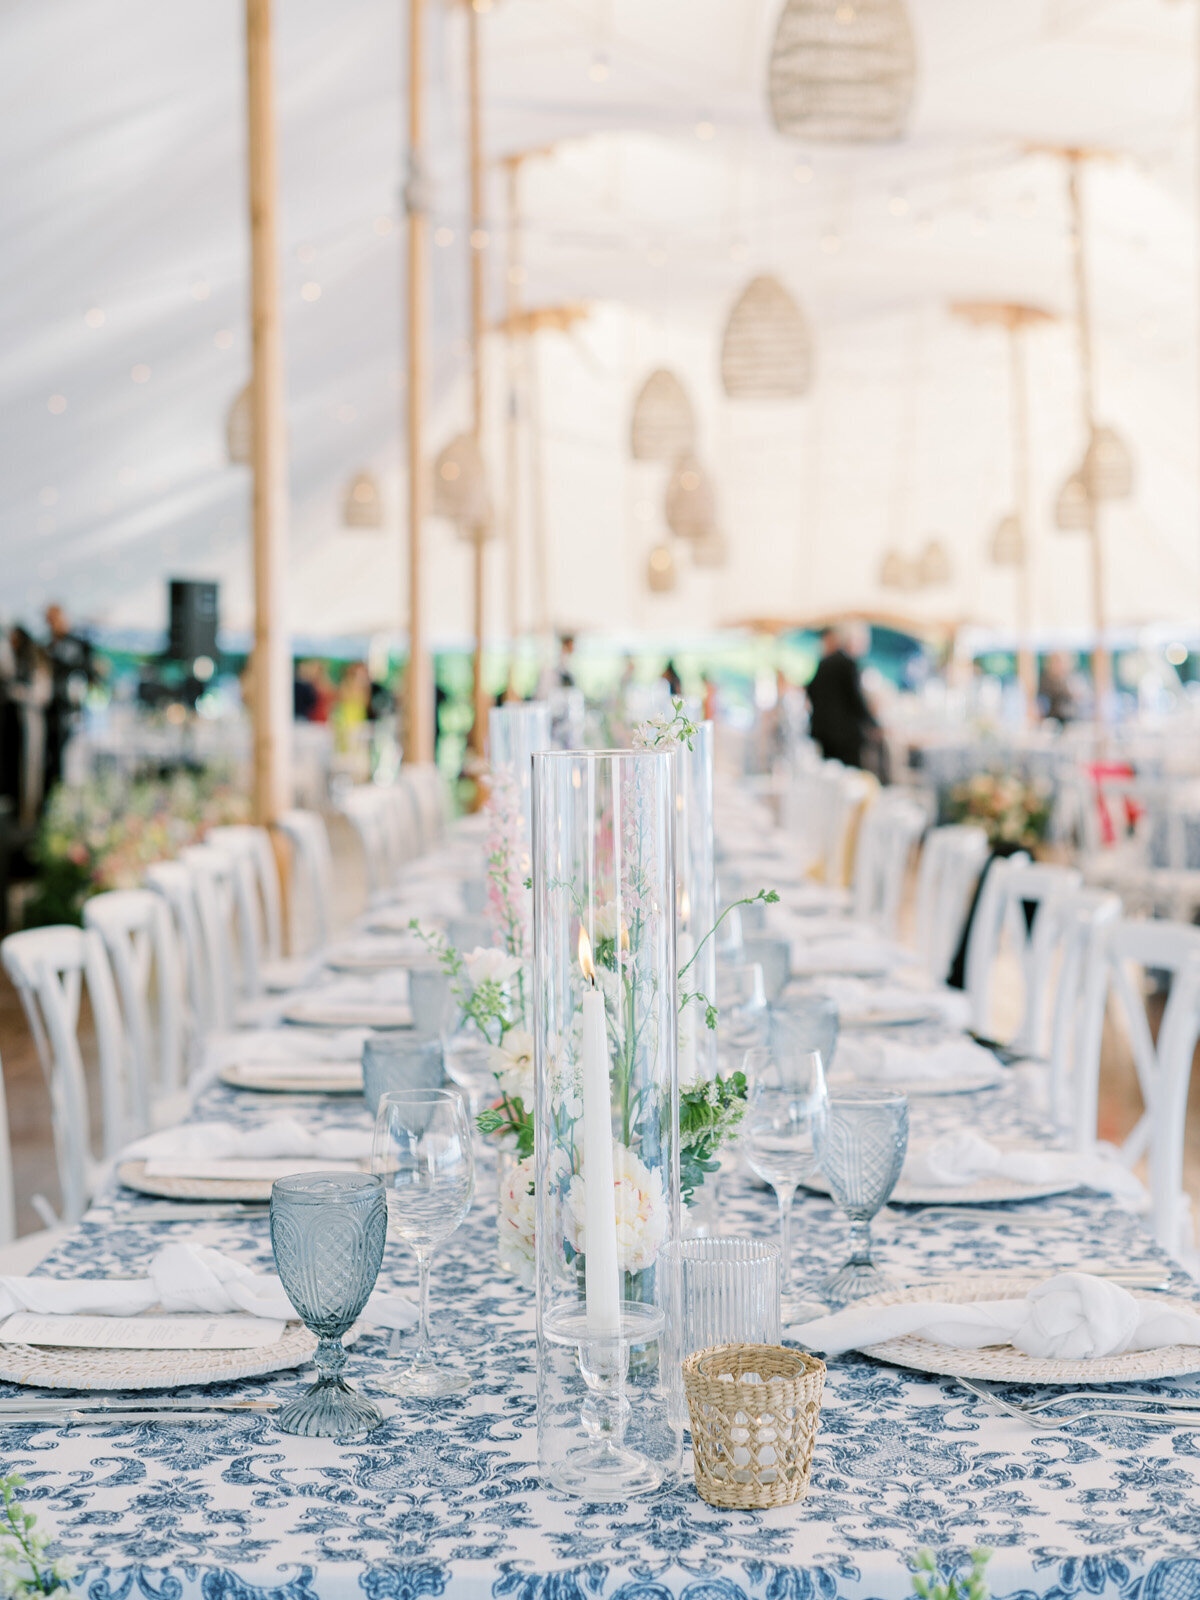 Kate-Murtaugh-Events-Newport-private-estate-tented-wedding-glass-candles